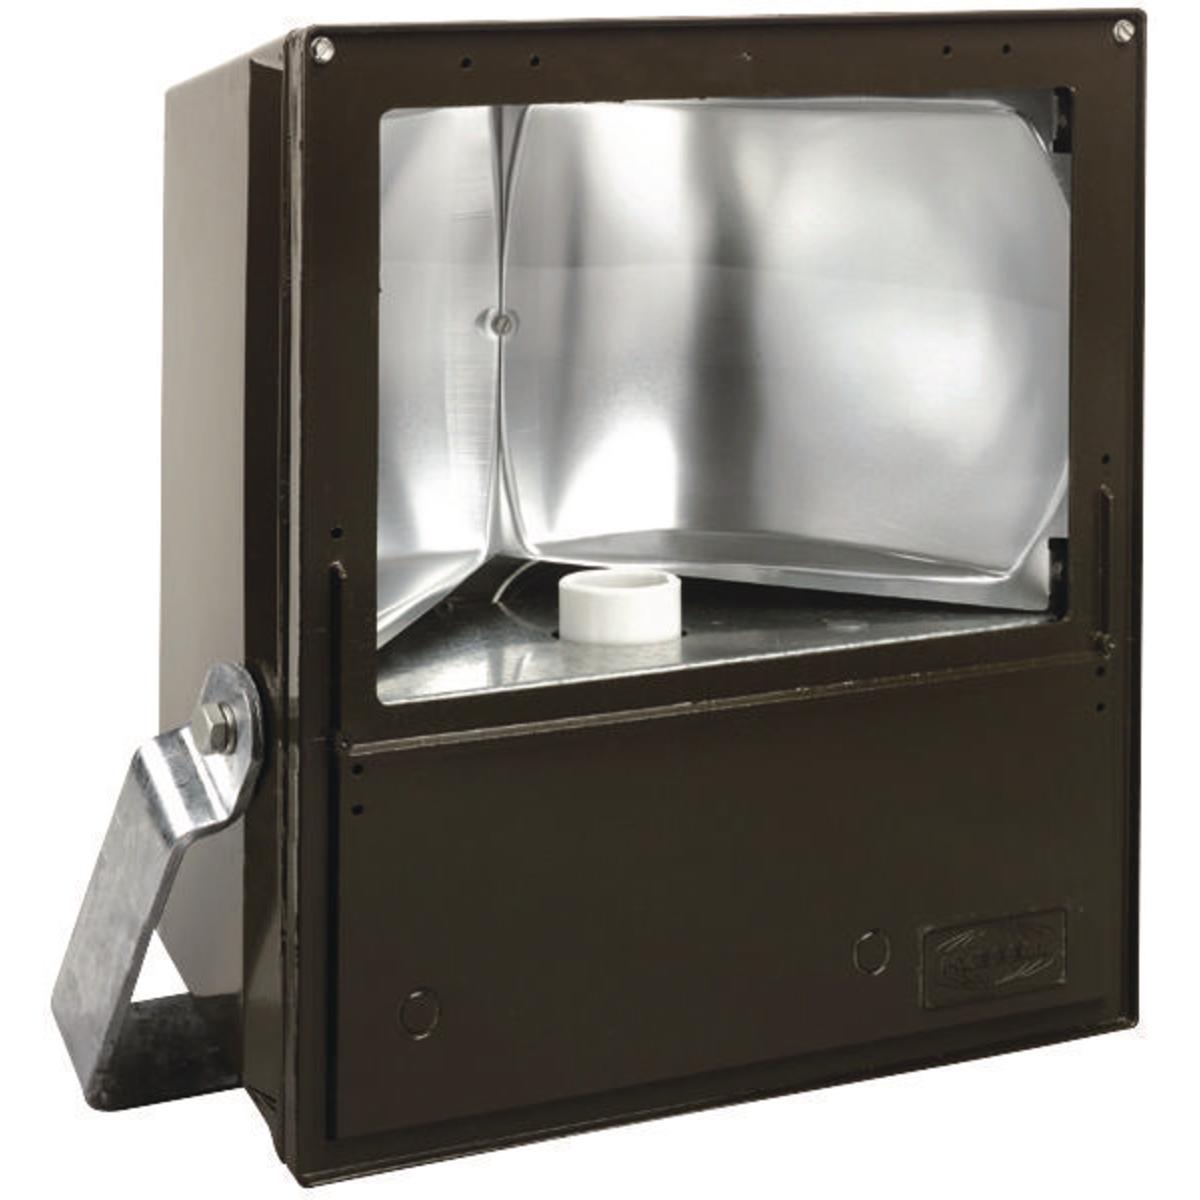 Hubbell KFS405-76 KF Series - Aluminum 400 Watt High Pressure Sodium Marine Floodlight (Lamp Not Included) - 480V At 60Hz  ; Rugged weathertight housing of copperfree aluminum with corrosion resistant bronze finish ; Wide beam distribution ; Thermal shock, impact-resistant